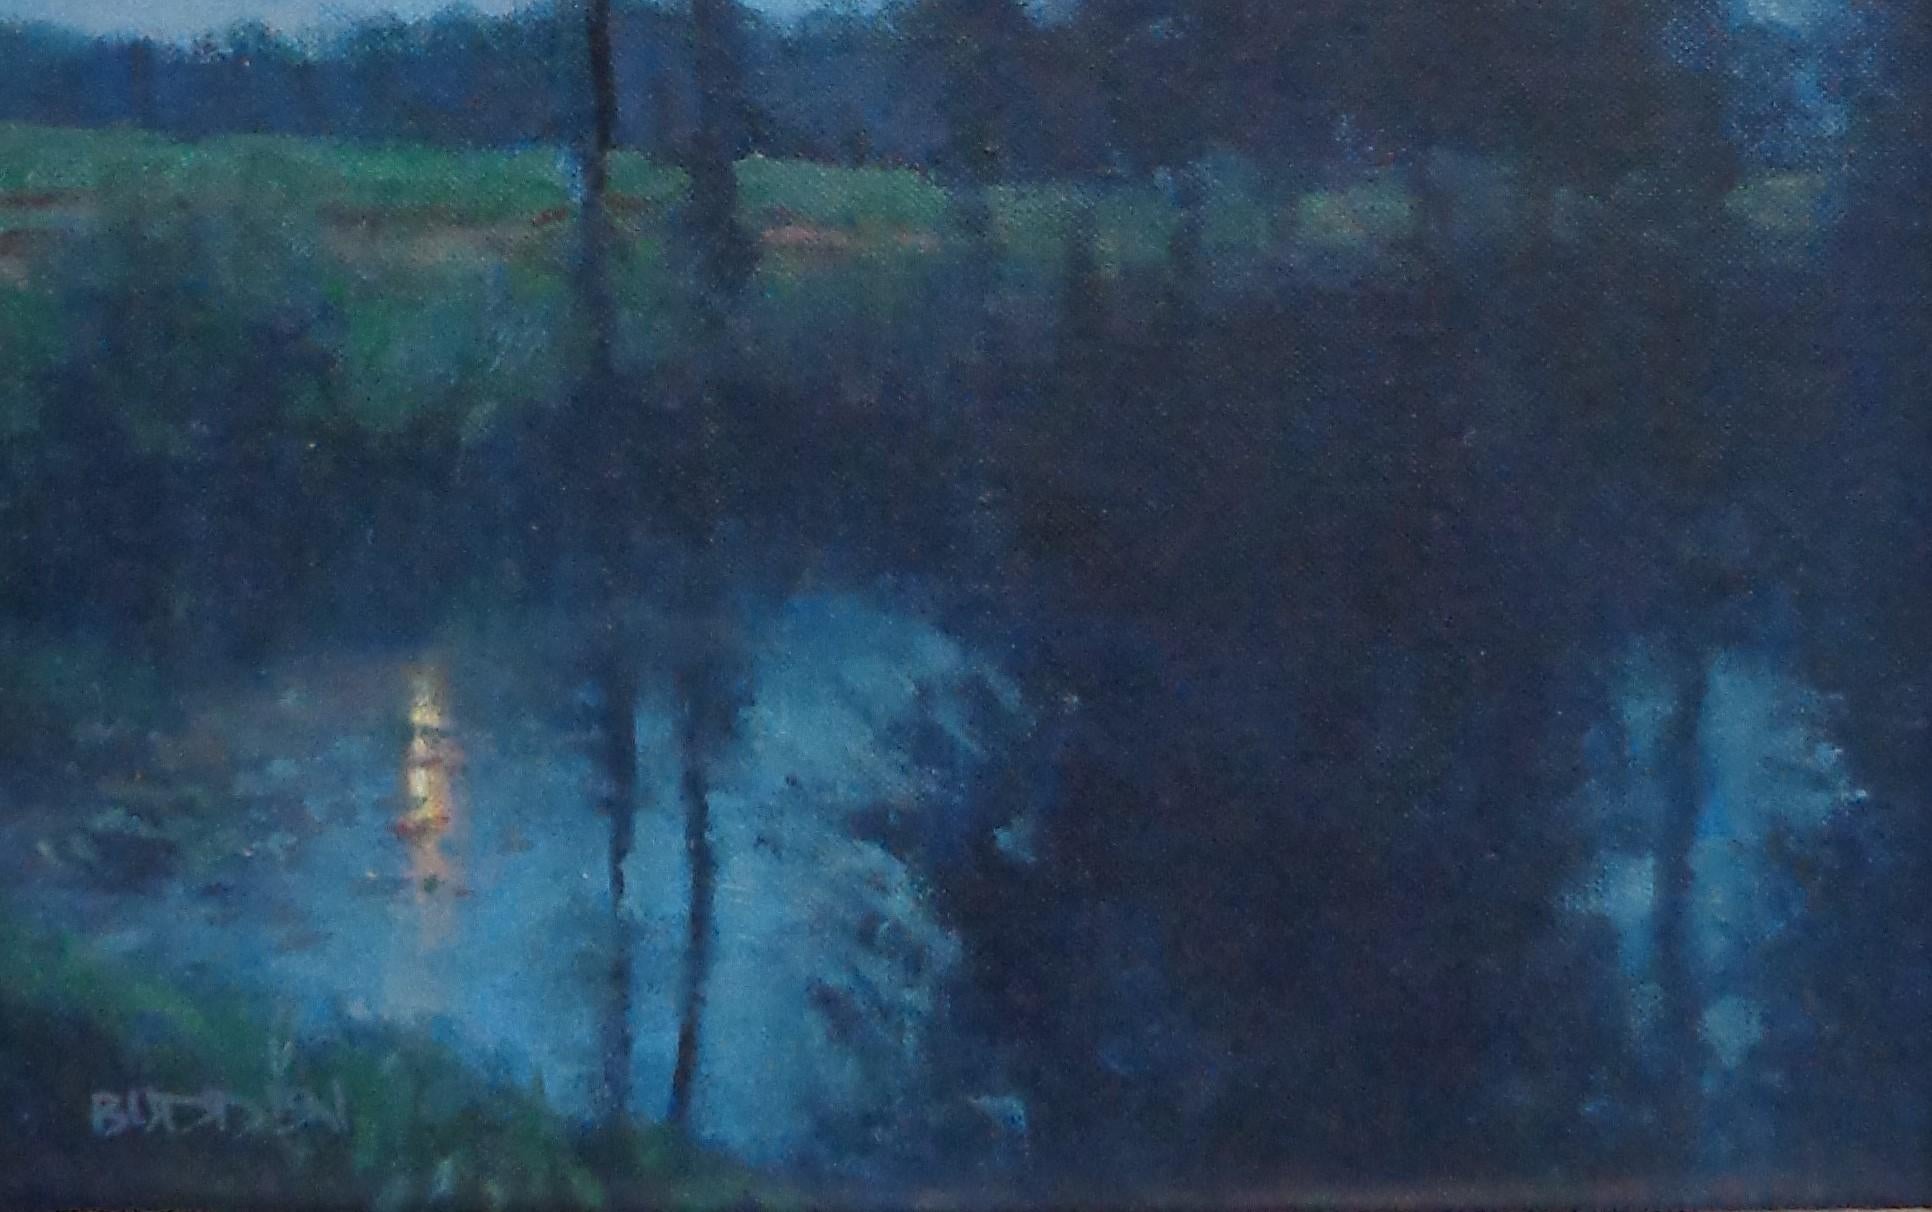 An oil painting on canvas that showcases a beautiful moon lit rural scene with reflections in a pond. The image measure 12 x 16 unframed housed in a new silver frame.

ARTIST'S STATEMENT
I have been in the art business as an artist and dealer since